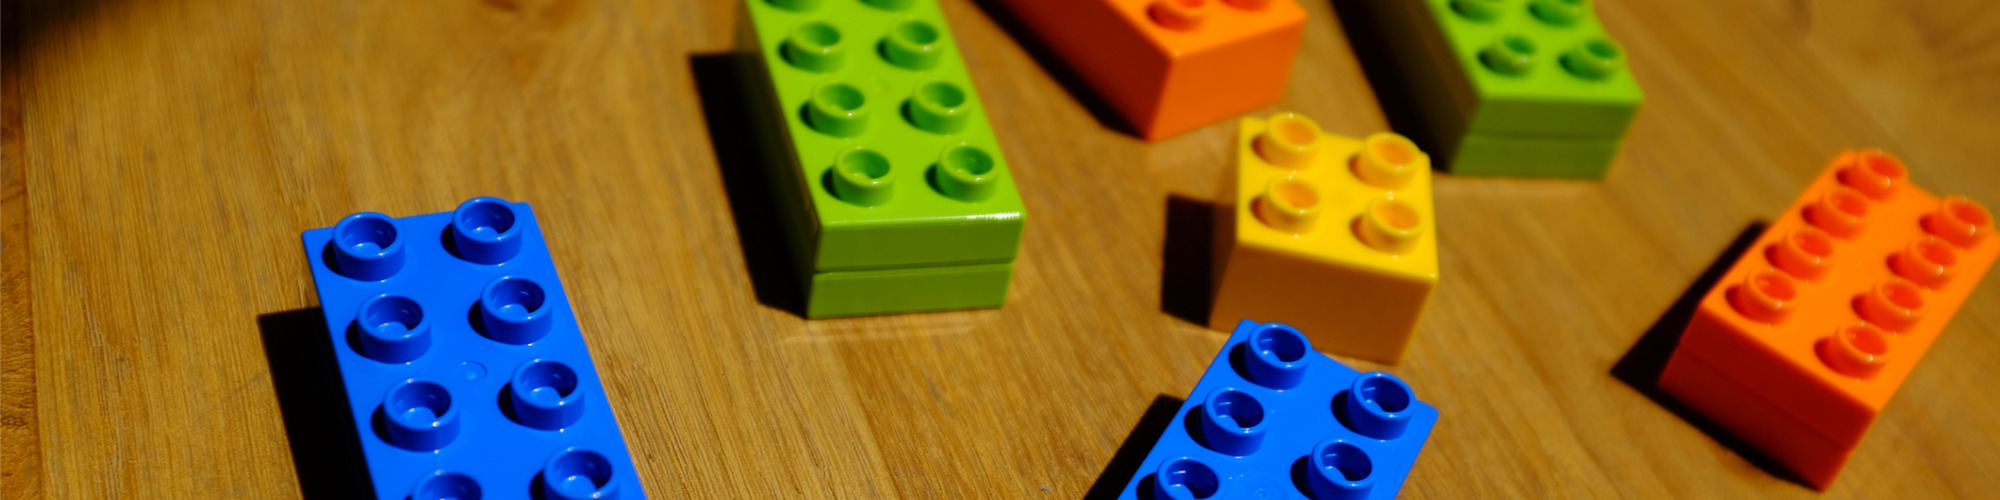 IP Enforcement in the EU - Lessons Learned from the Lego Case